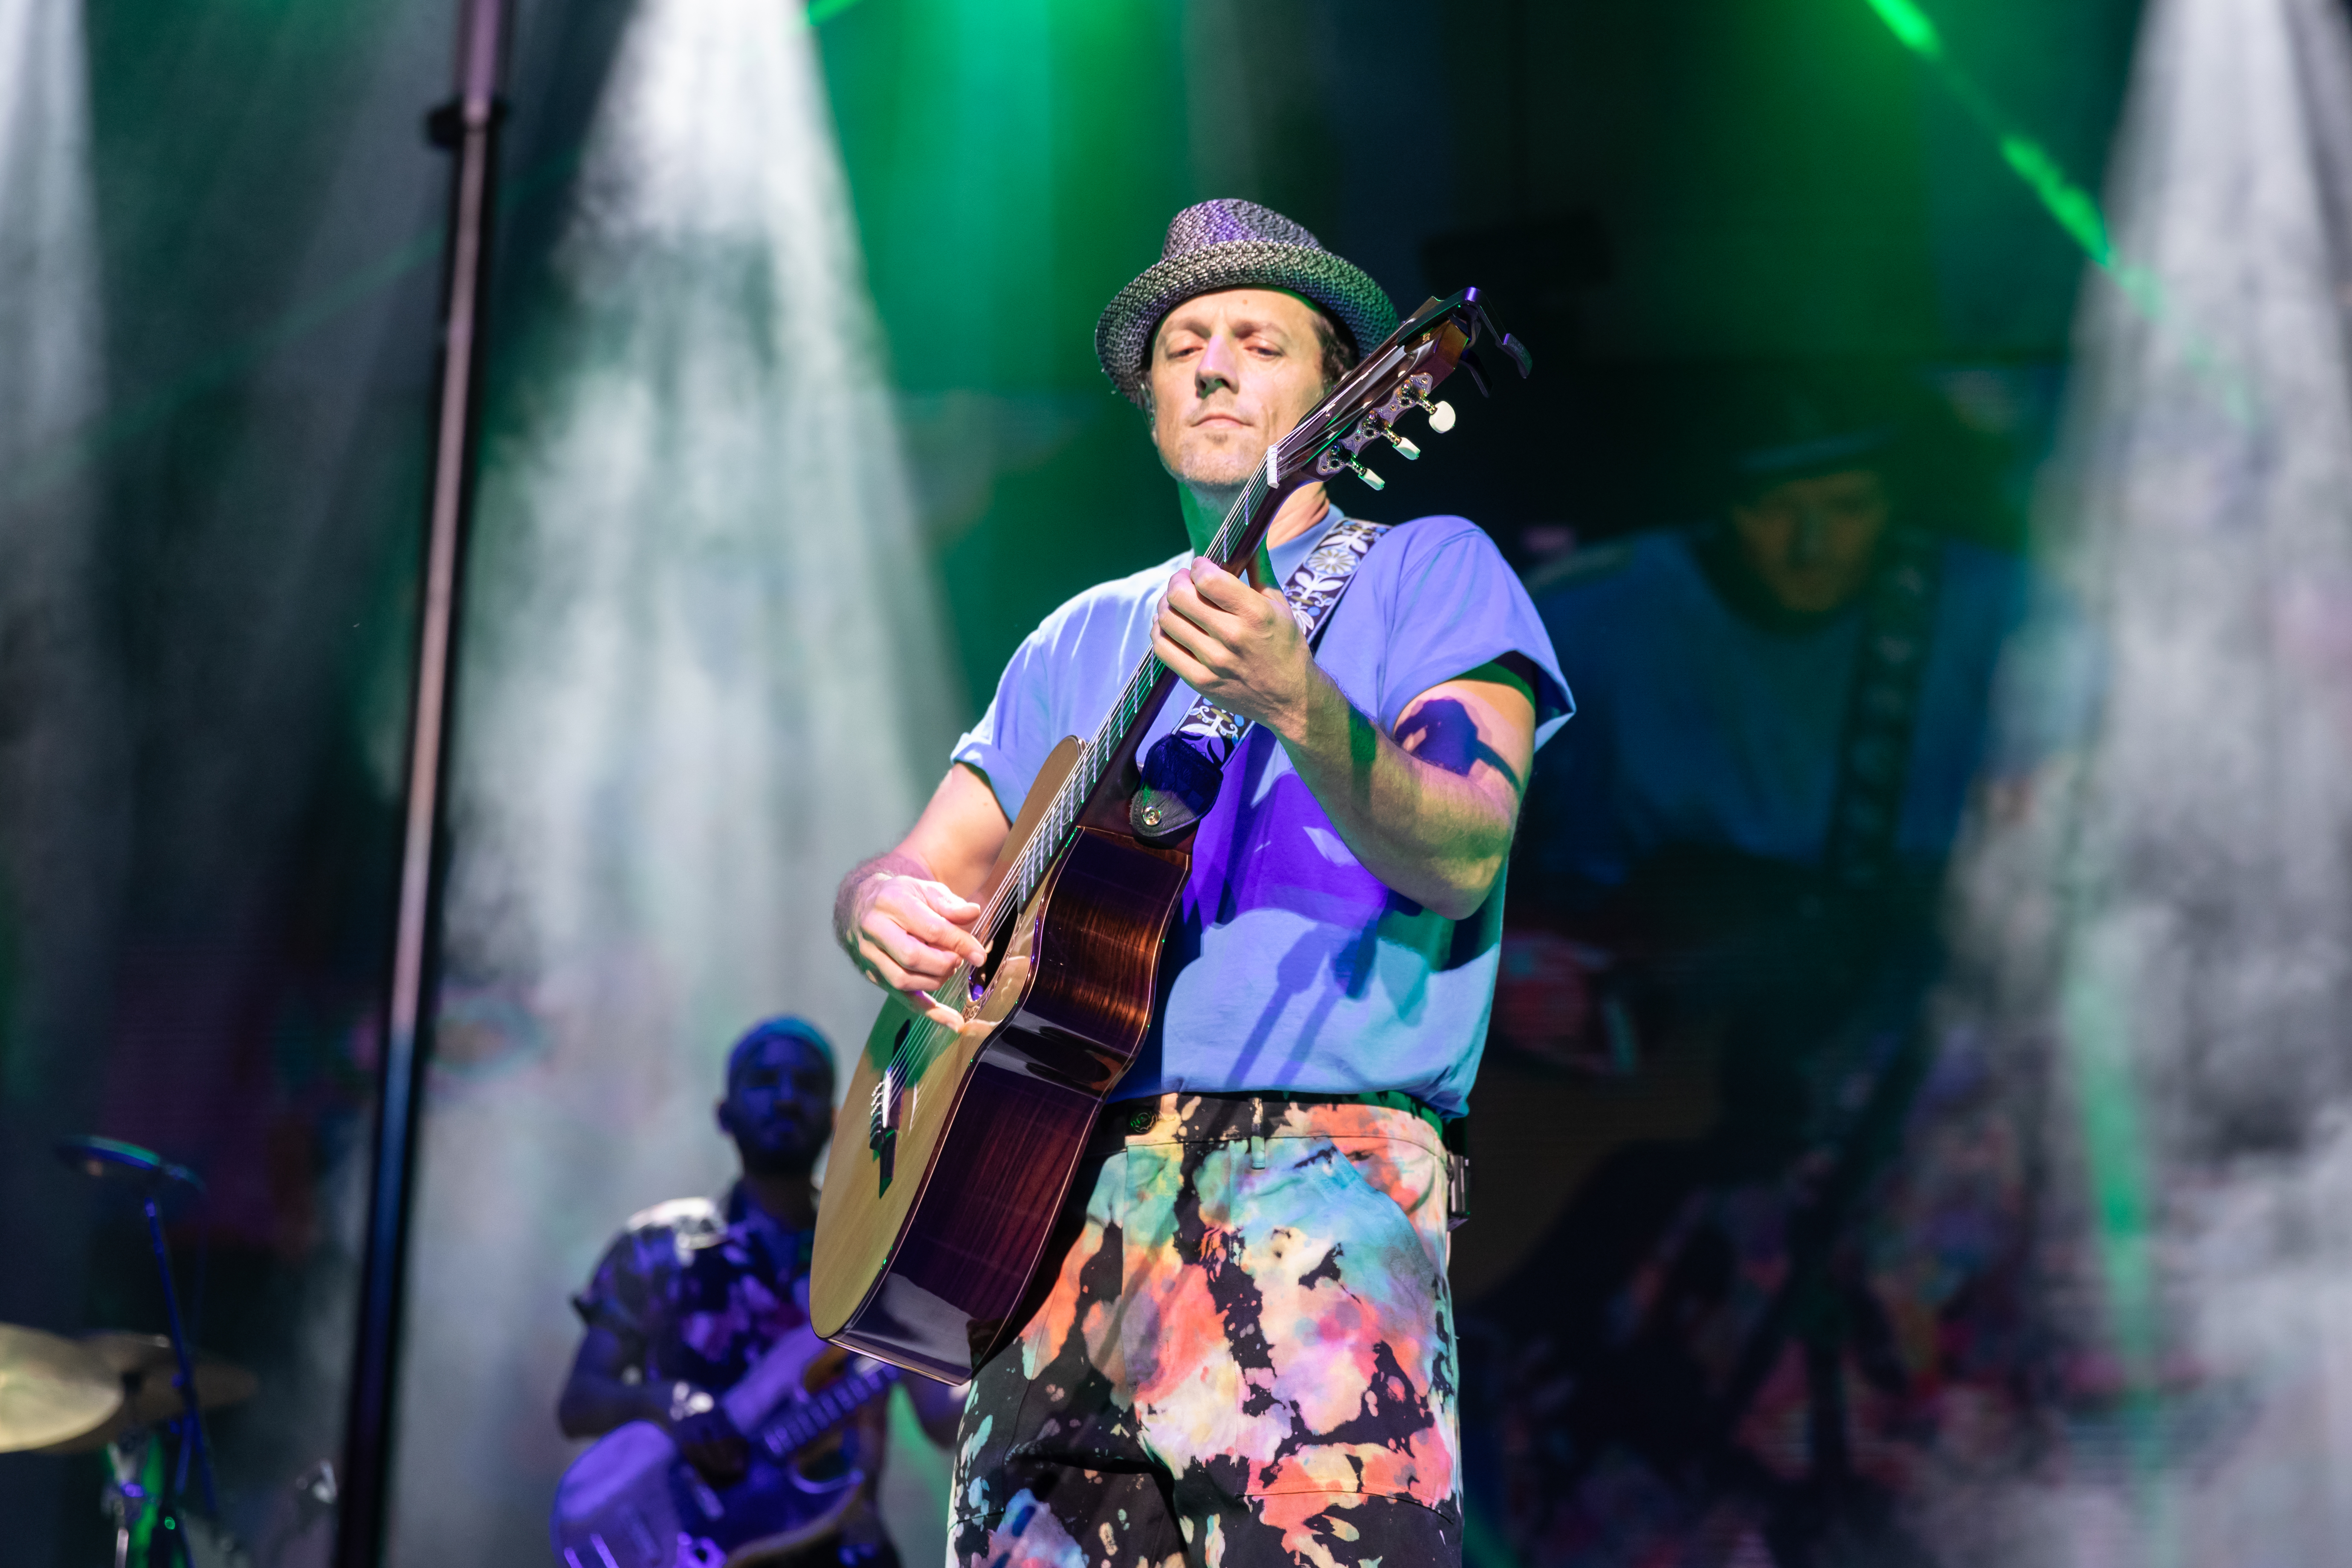 Jason Mraz performs at The Greek Theatre on July 19, 2023, in Berkeley, California. | Source: Getty Images